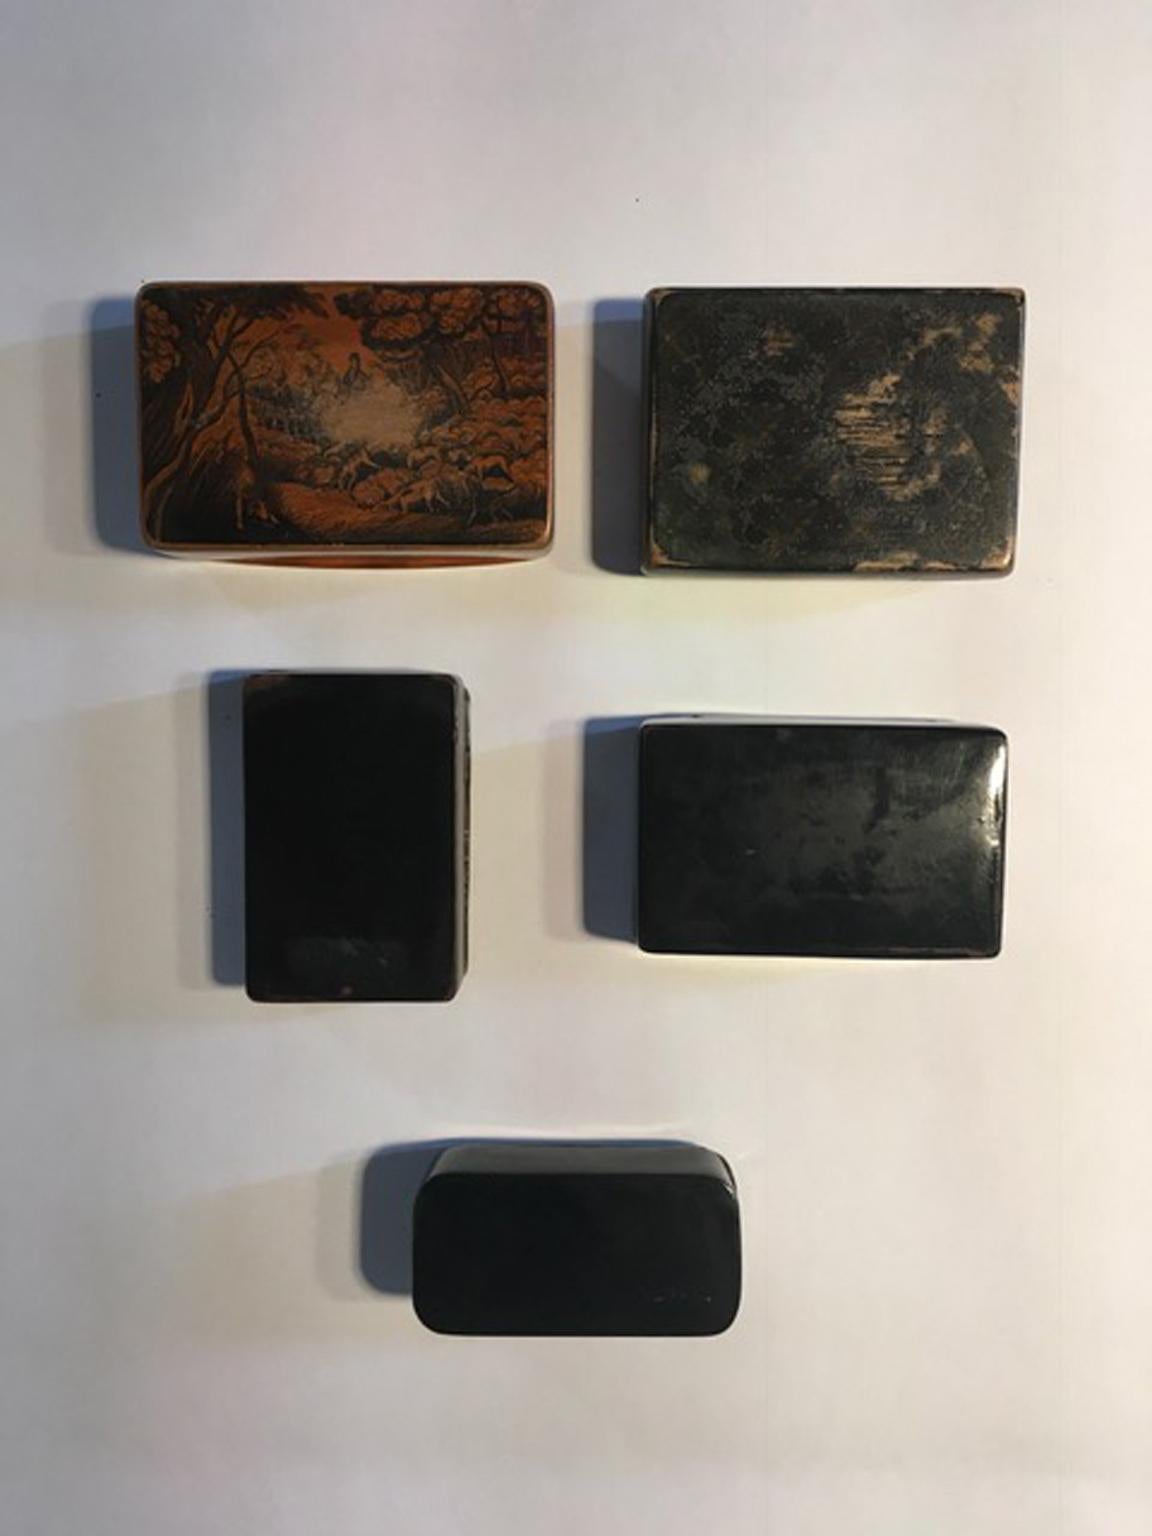 These fine wood lacquered wood boxes are in Romantic style and they are painted both on the sides: on one of these there's an elegant lady on one side and on the other side, a natural landscape, so fine to look like a Flemish painting. All the boxes